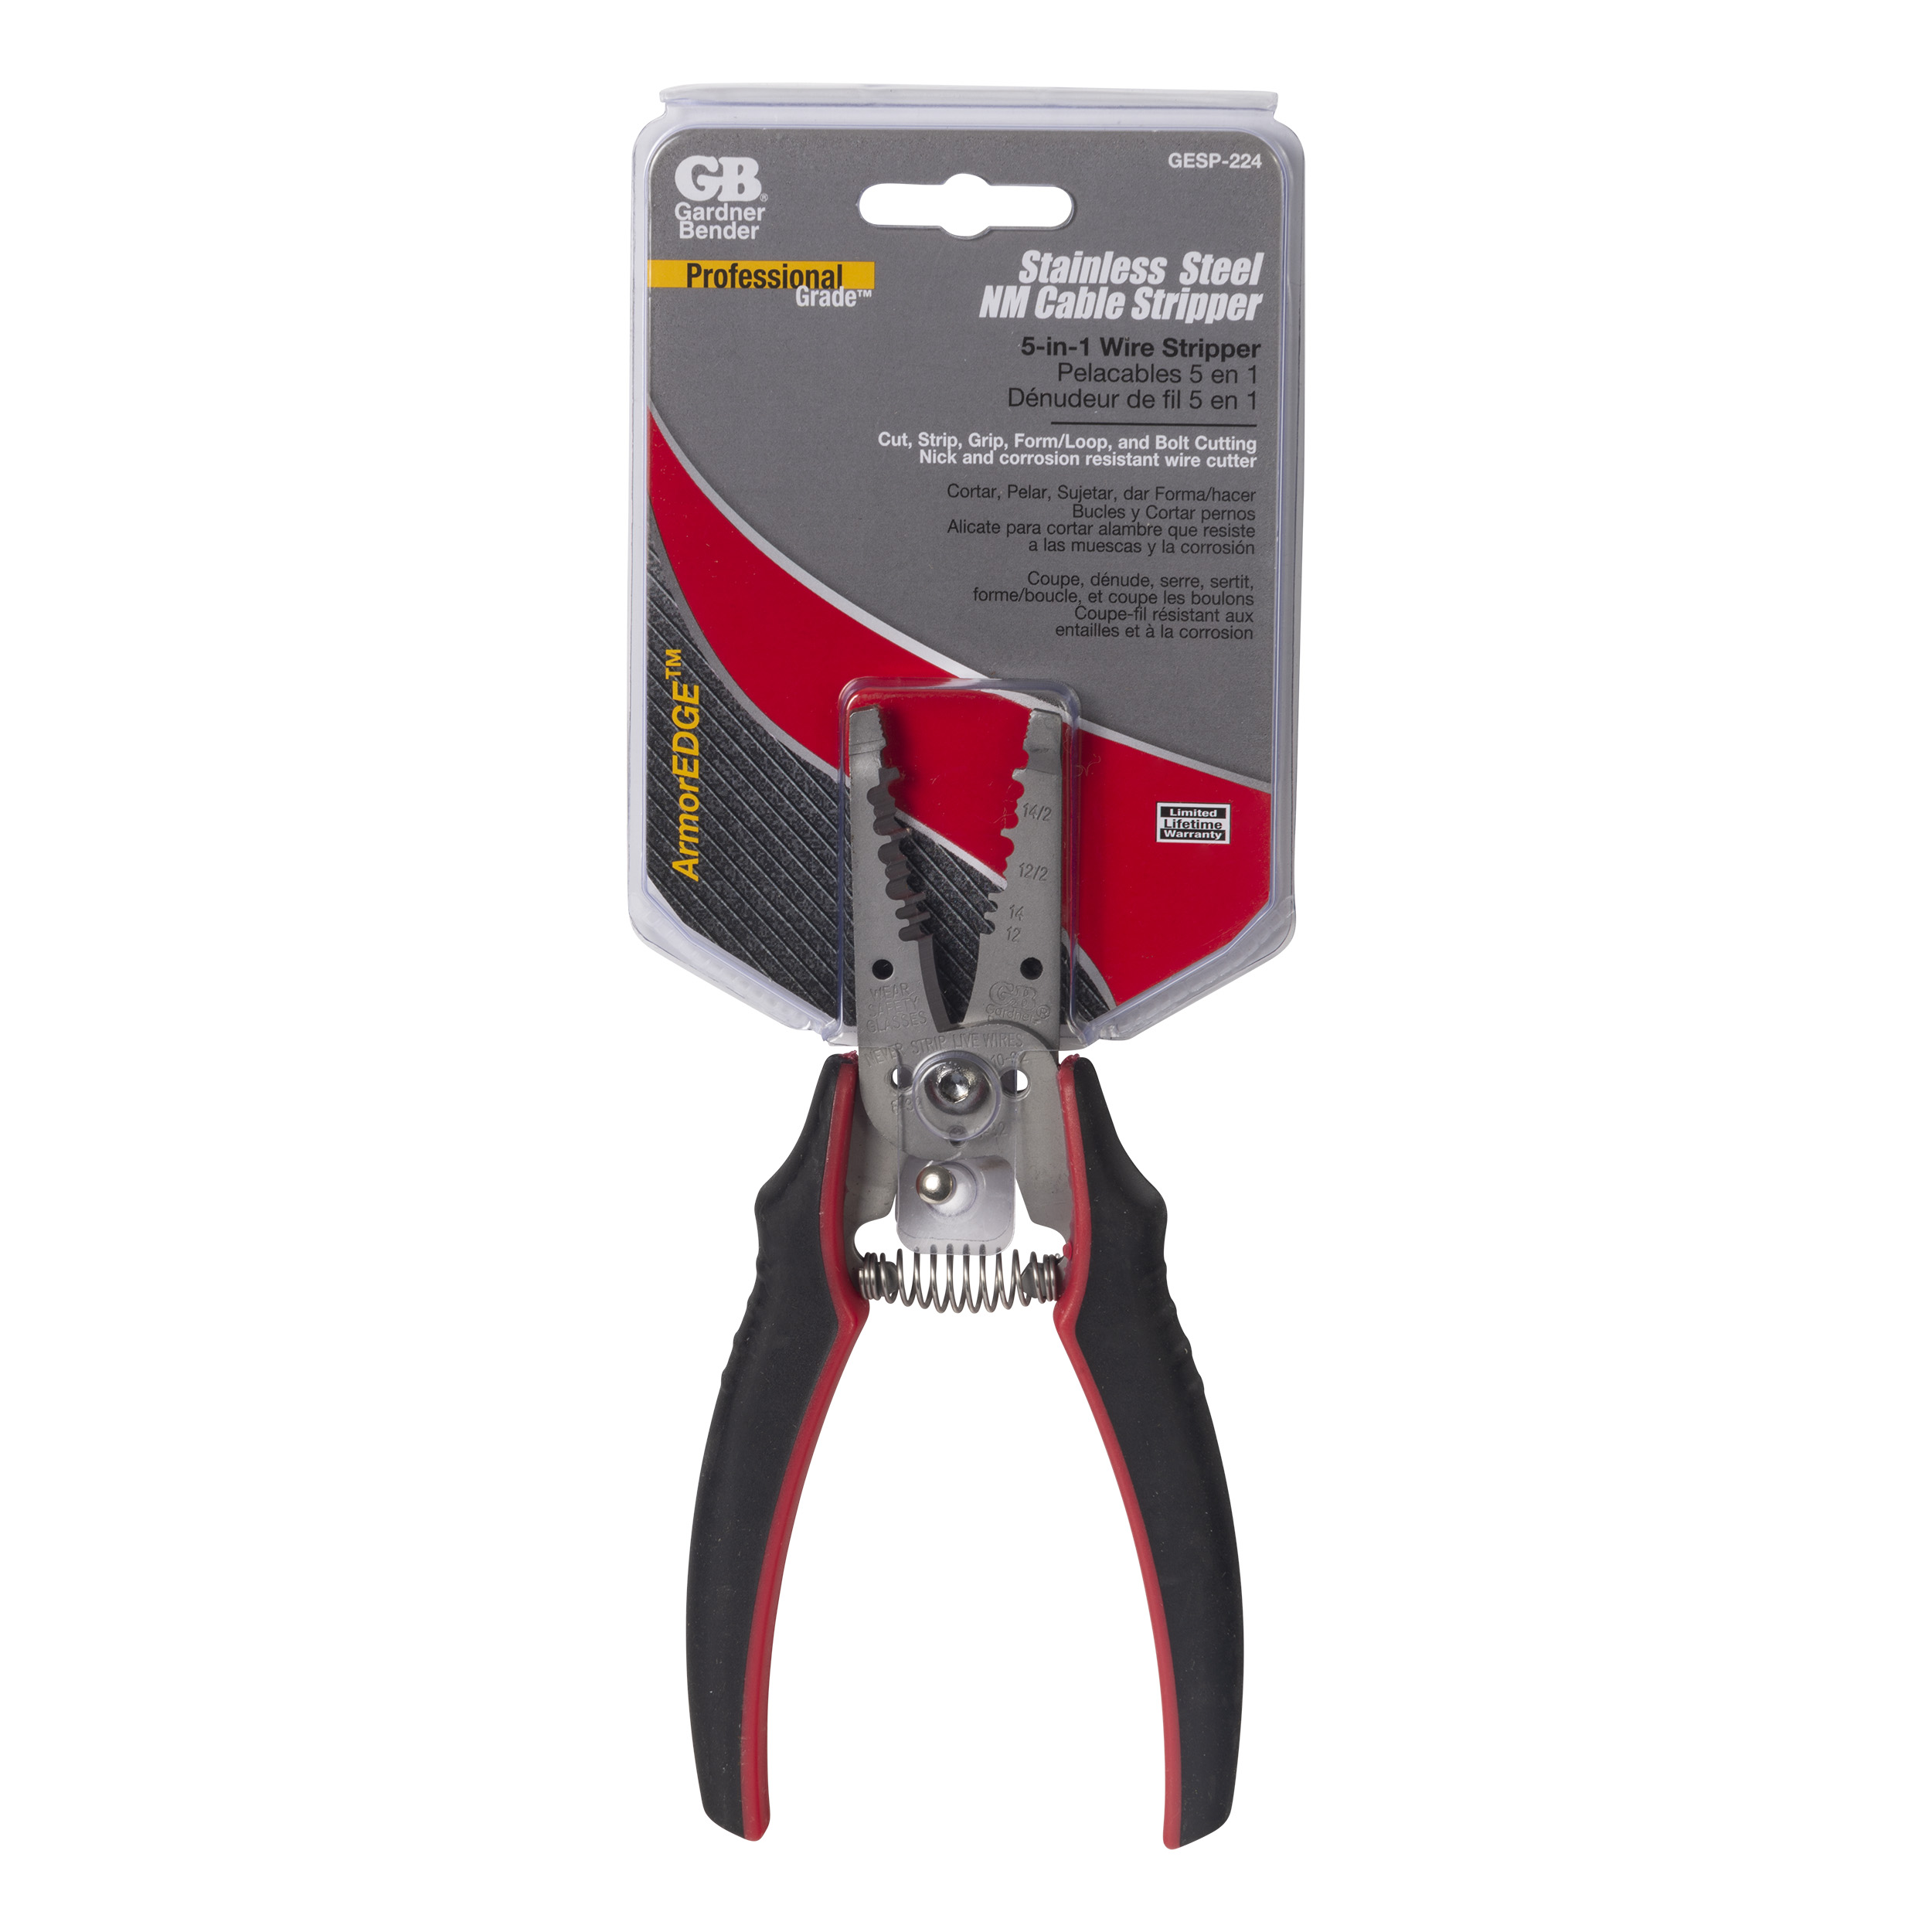 Gardner Bender GESP-224 Professional Grade ArmorEdge Cable Stripper Symmetric Handle, Stainless Steel 12/2 & 14/2 NM Cable 7.25 in. 